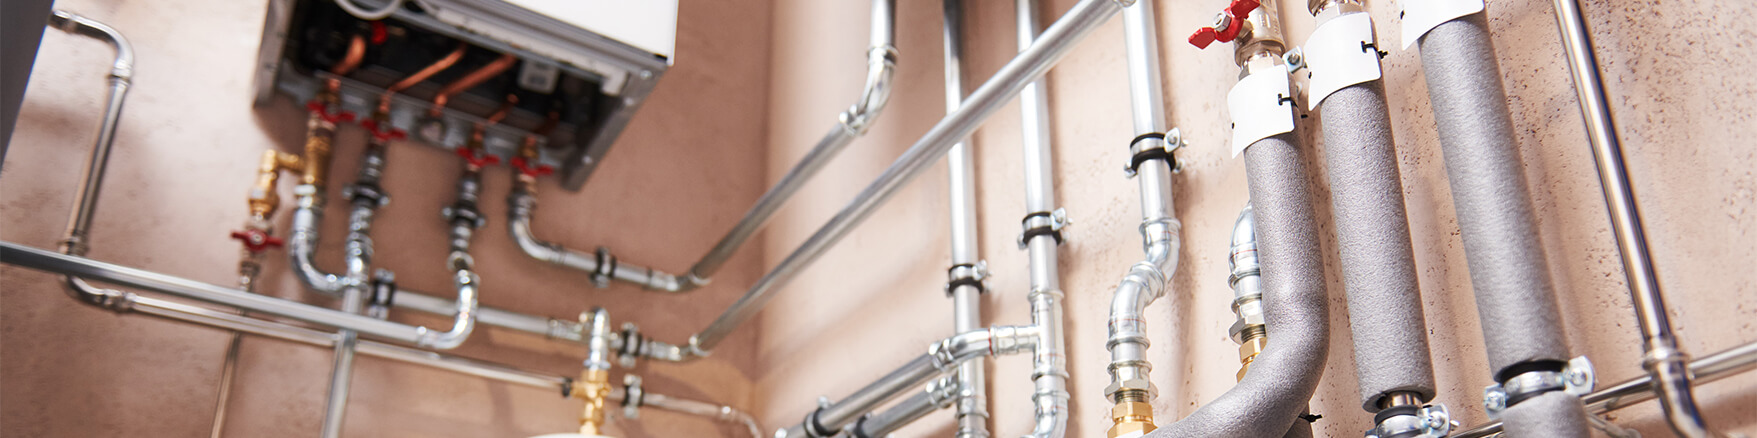 Spencer Plumbing Company, Plumbing Services and Water Heater Installation